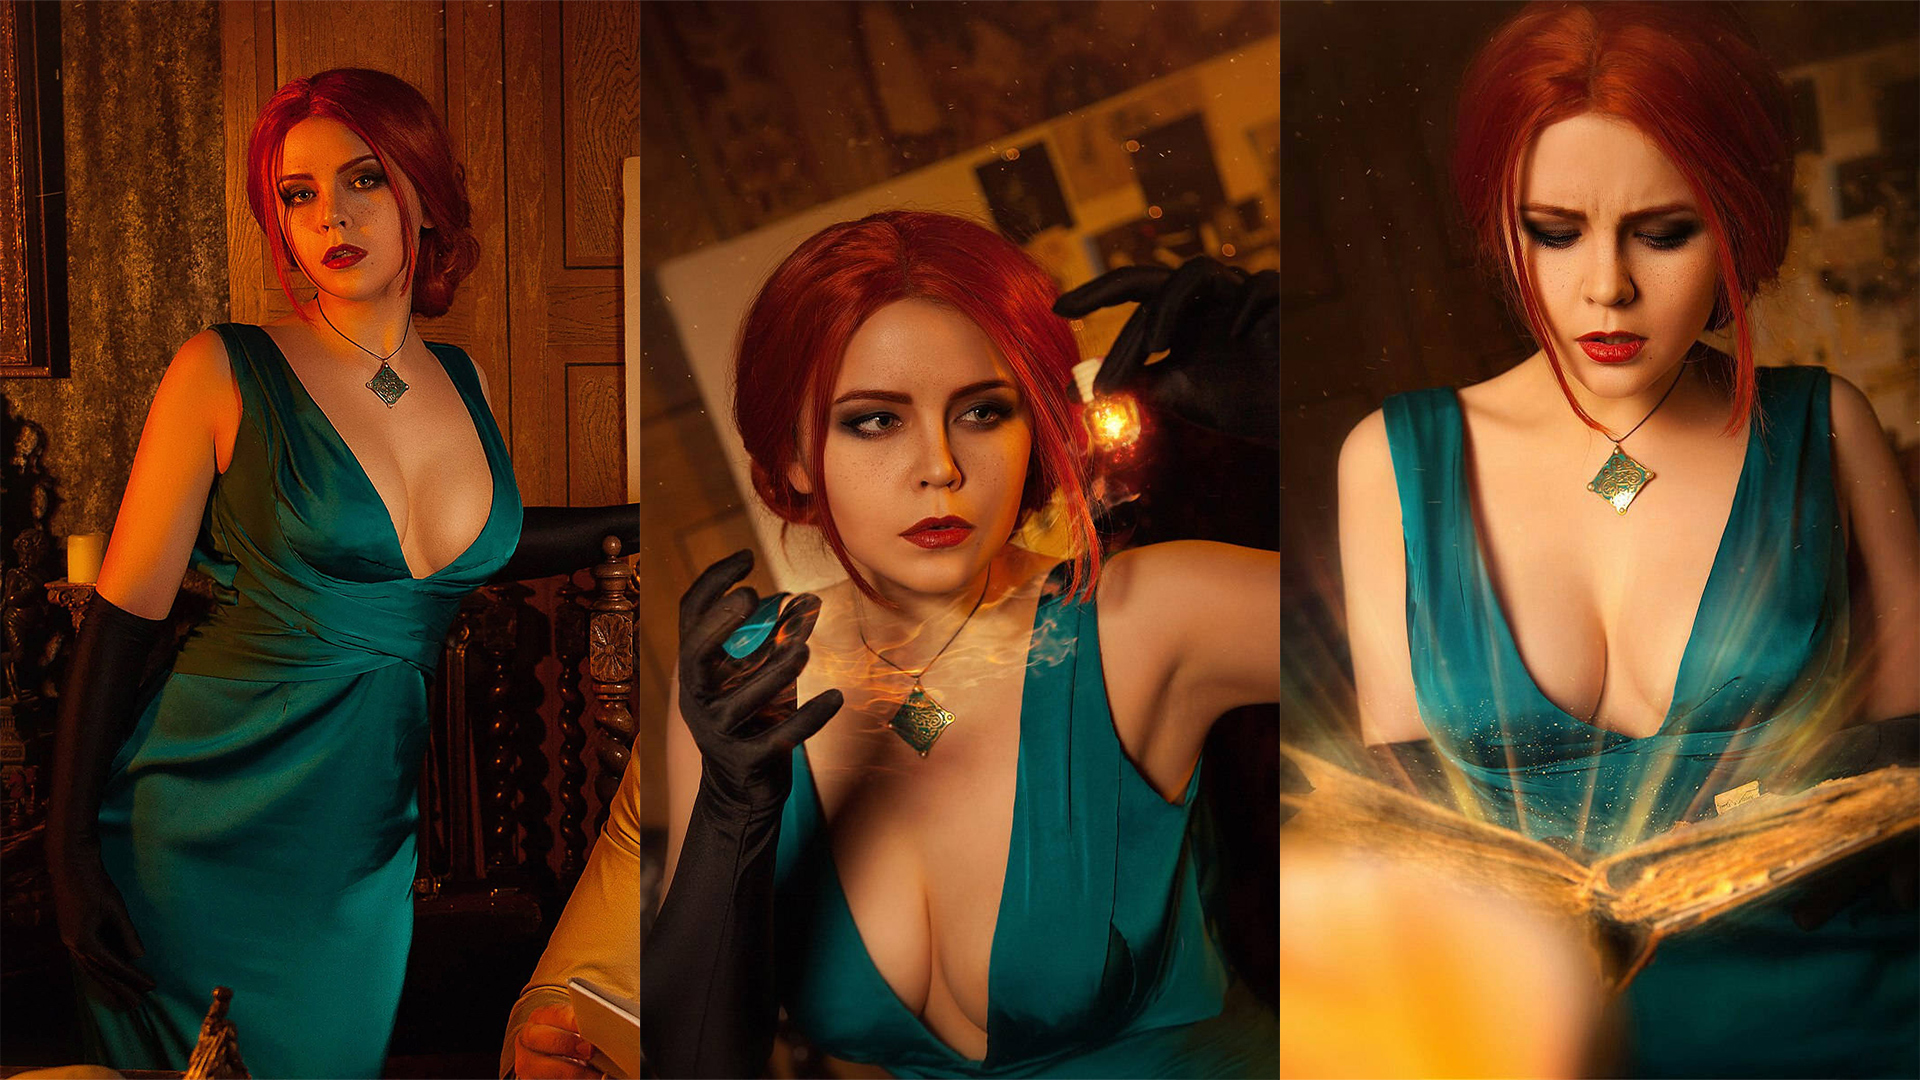 People 1920x1080 women collage cosplay The Witcher Triss Merigold The Witcher 3: Wild Hunt cleavage blue dress costumes black gloves redhead dress